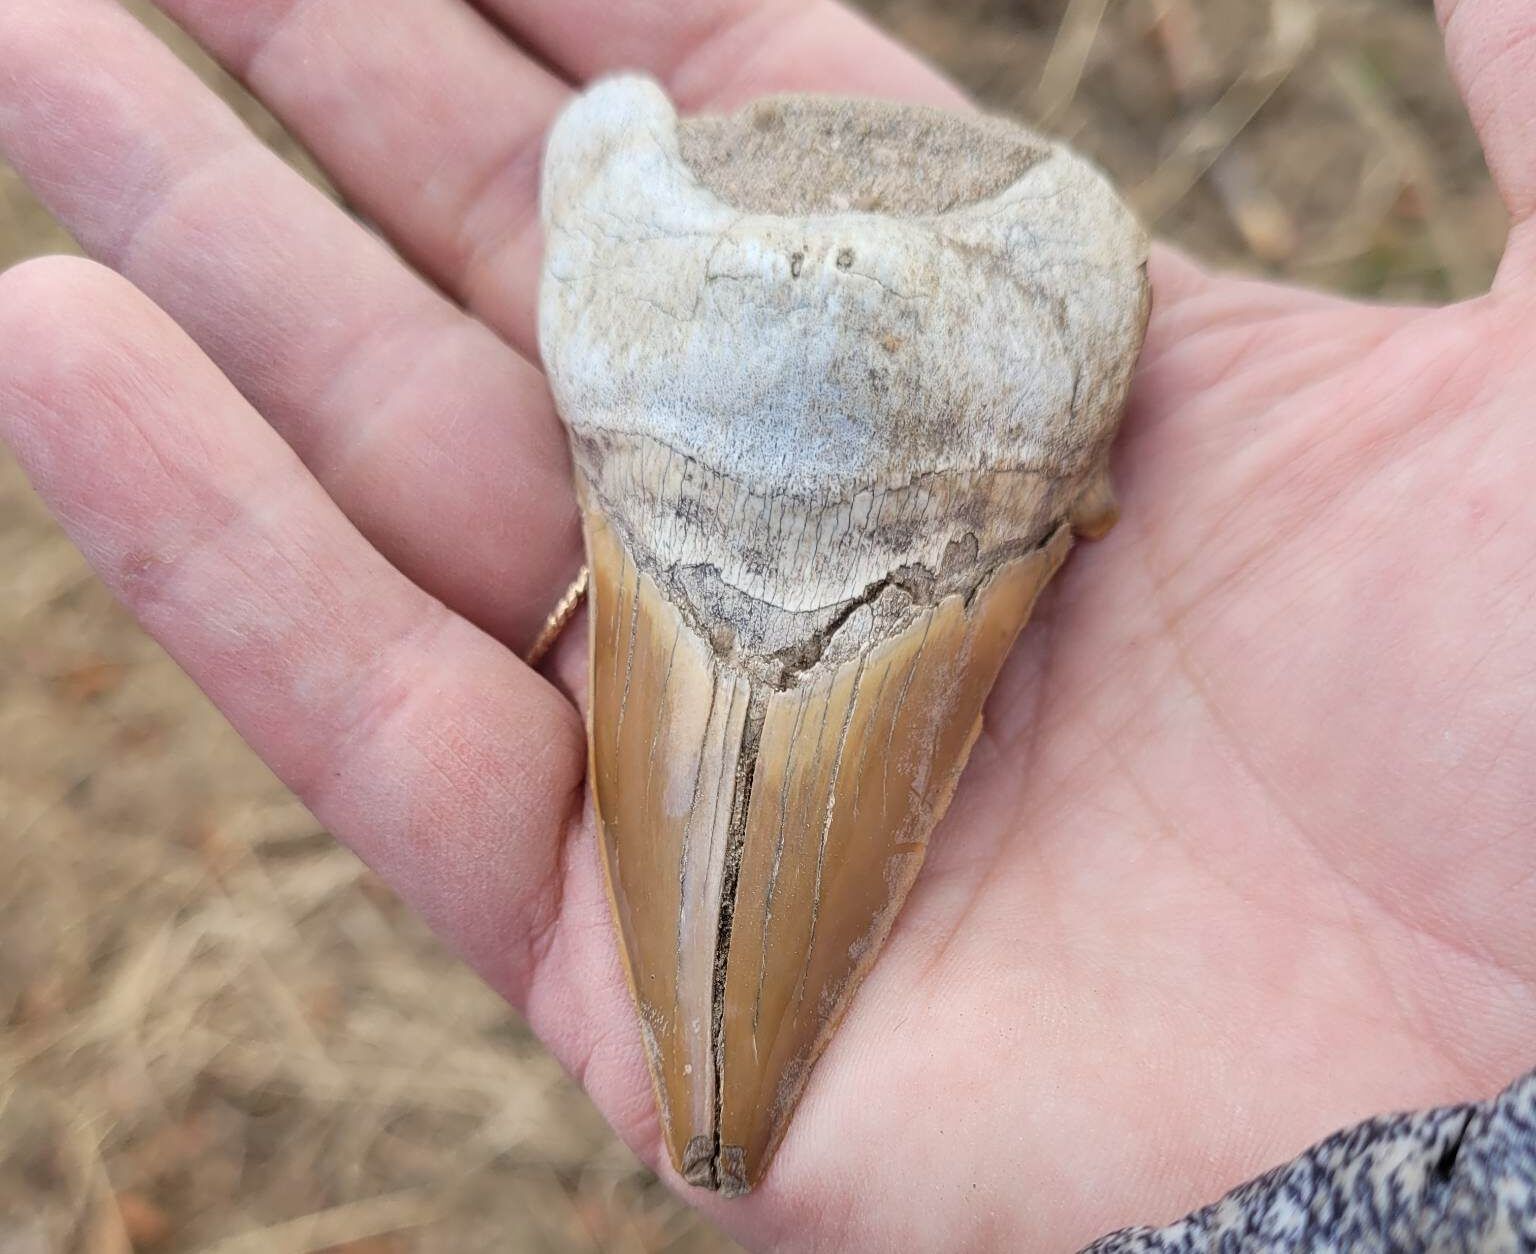 Prehistoric Megalodon Shark Tooth Found In Prince George By Rock Hunting Mother And Daughter